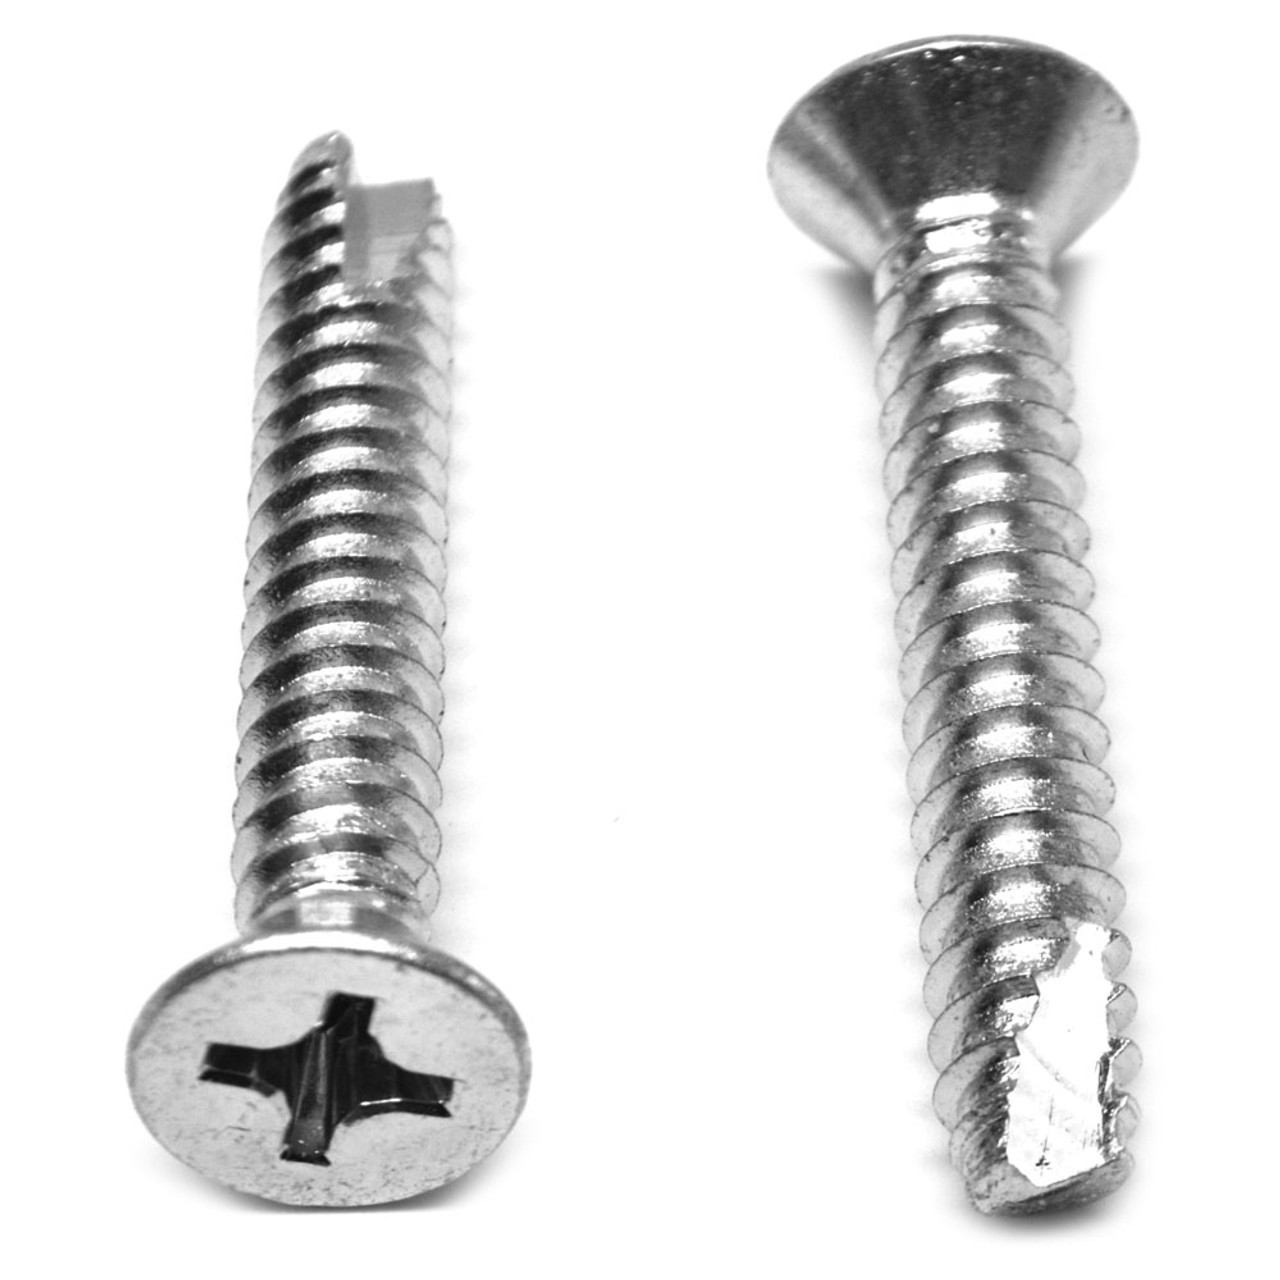 Star Drive 18-8 Stainless Steel Thread Cutting Screw Pack of 50 Type 25 Plain Finish Pan Head Pack of 50 3/8 Length #10-16 Thread Size Small Parts 10065TP188 3/8 Length